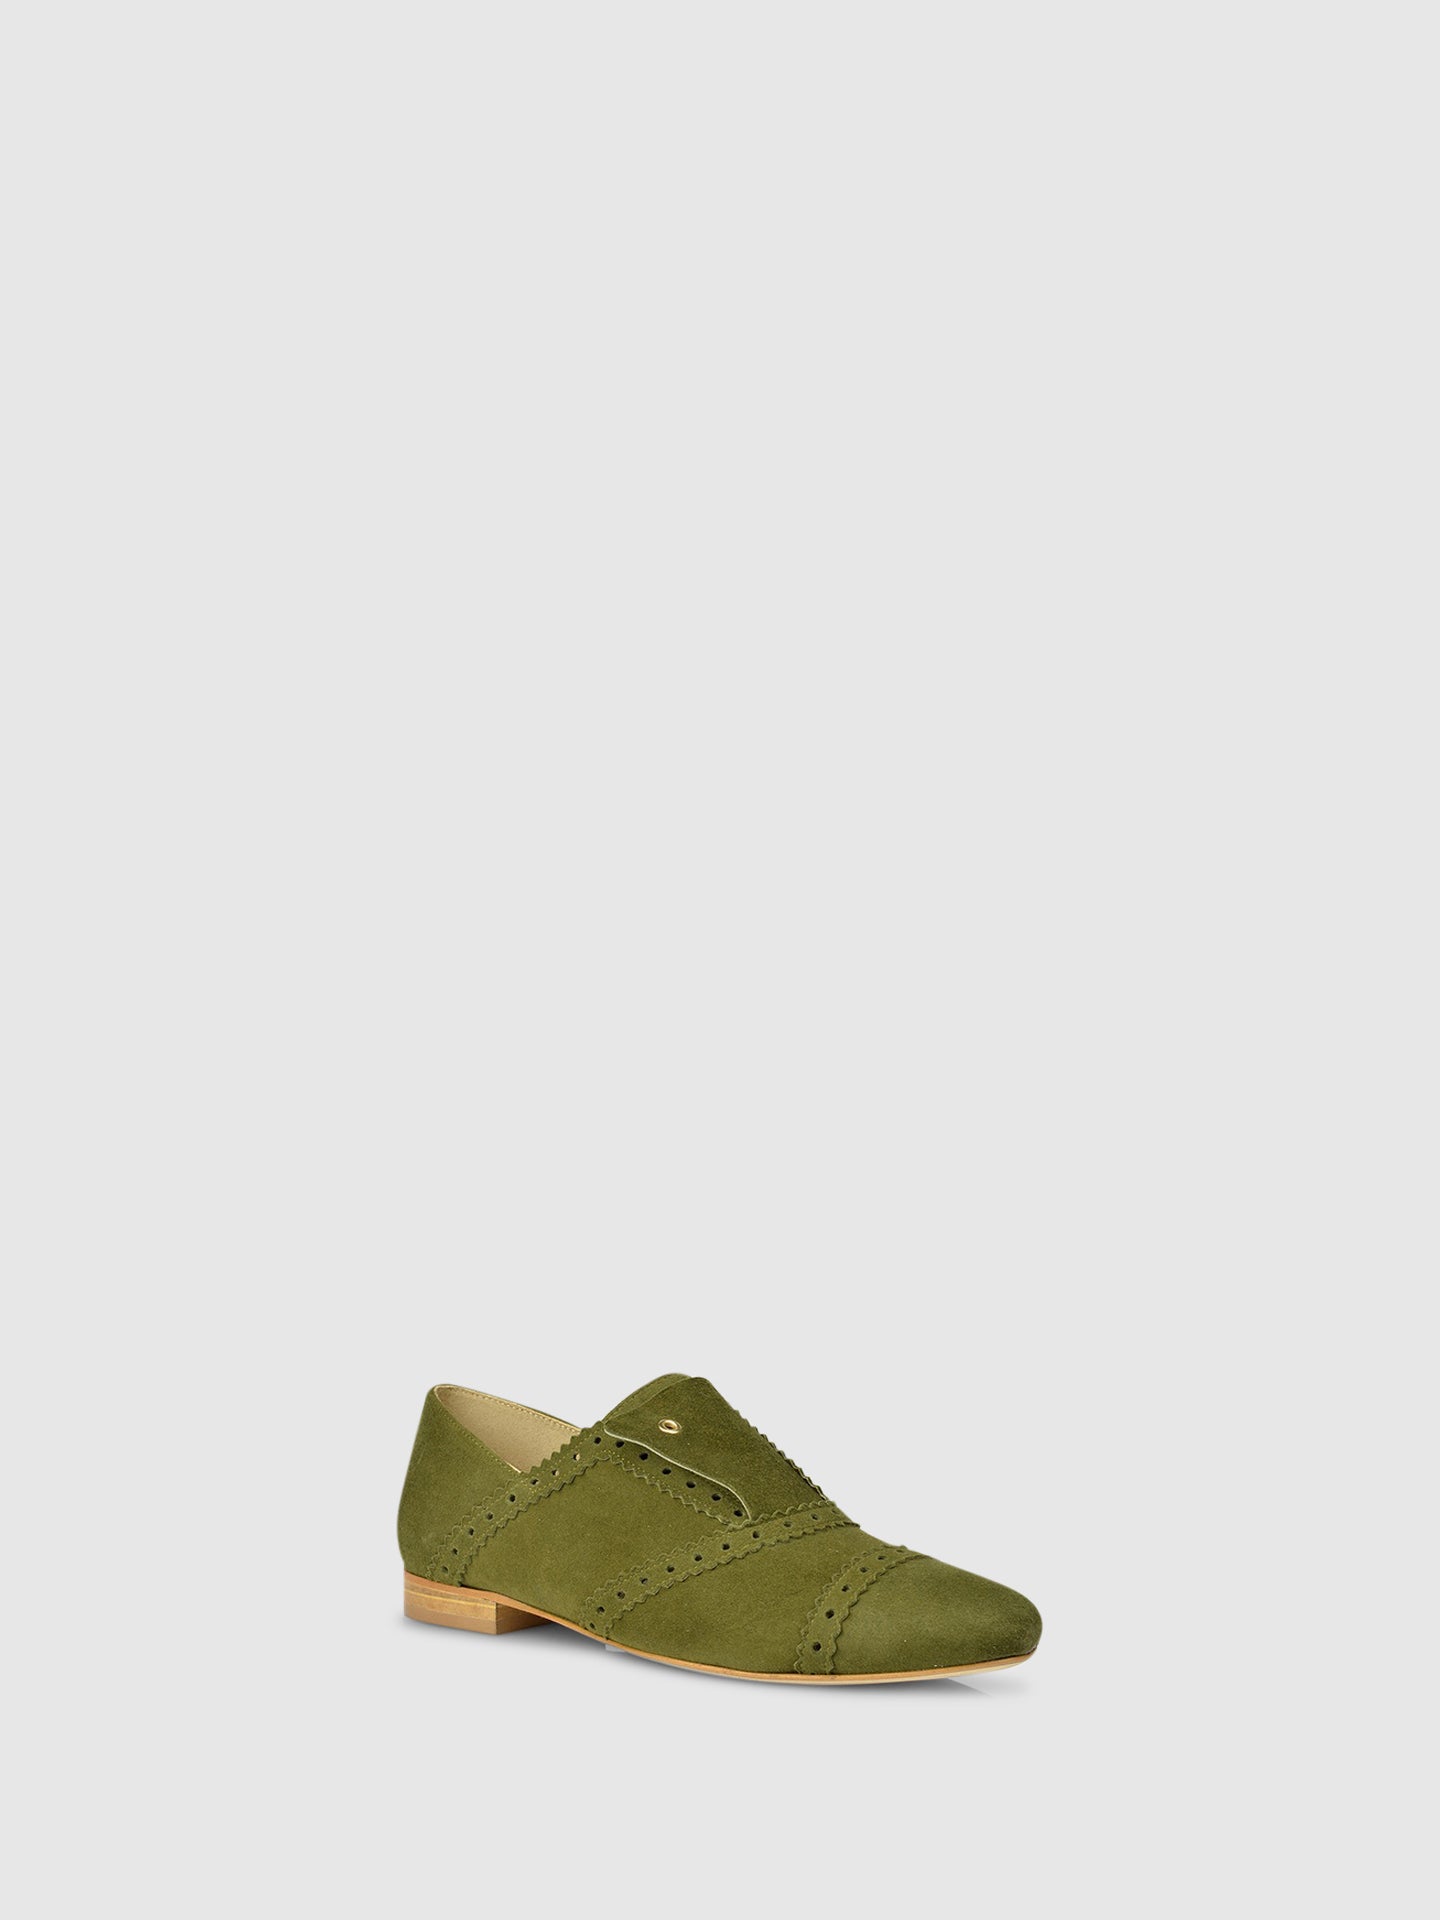 JJ Heitor Loafers Clássicos D04L1 Green